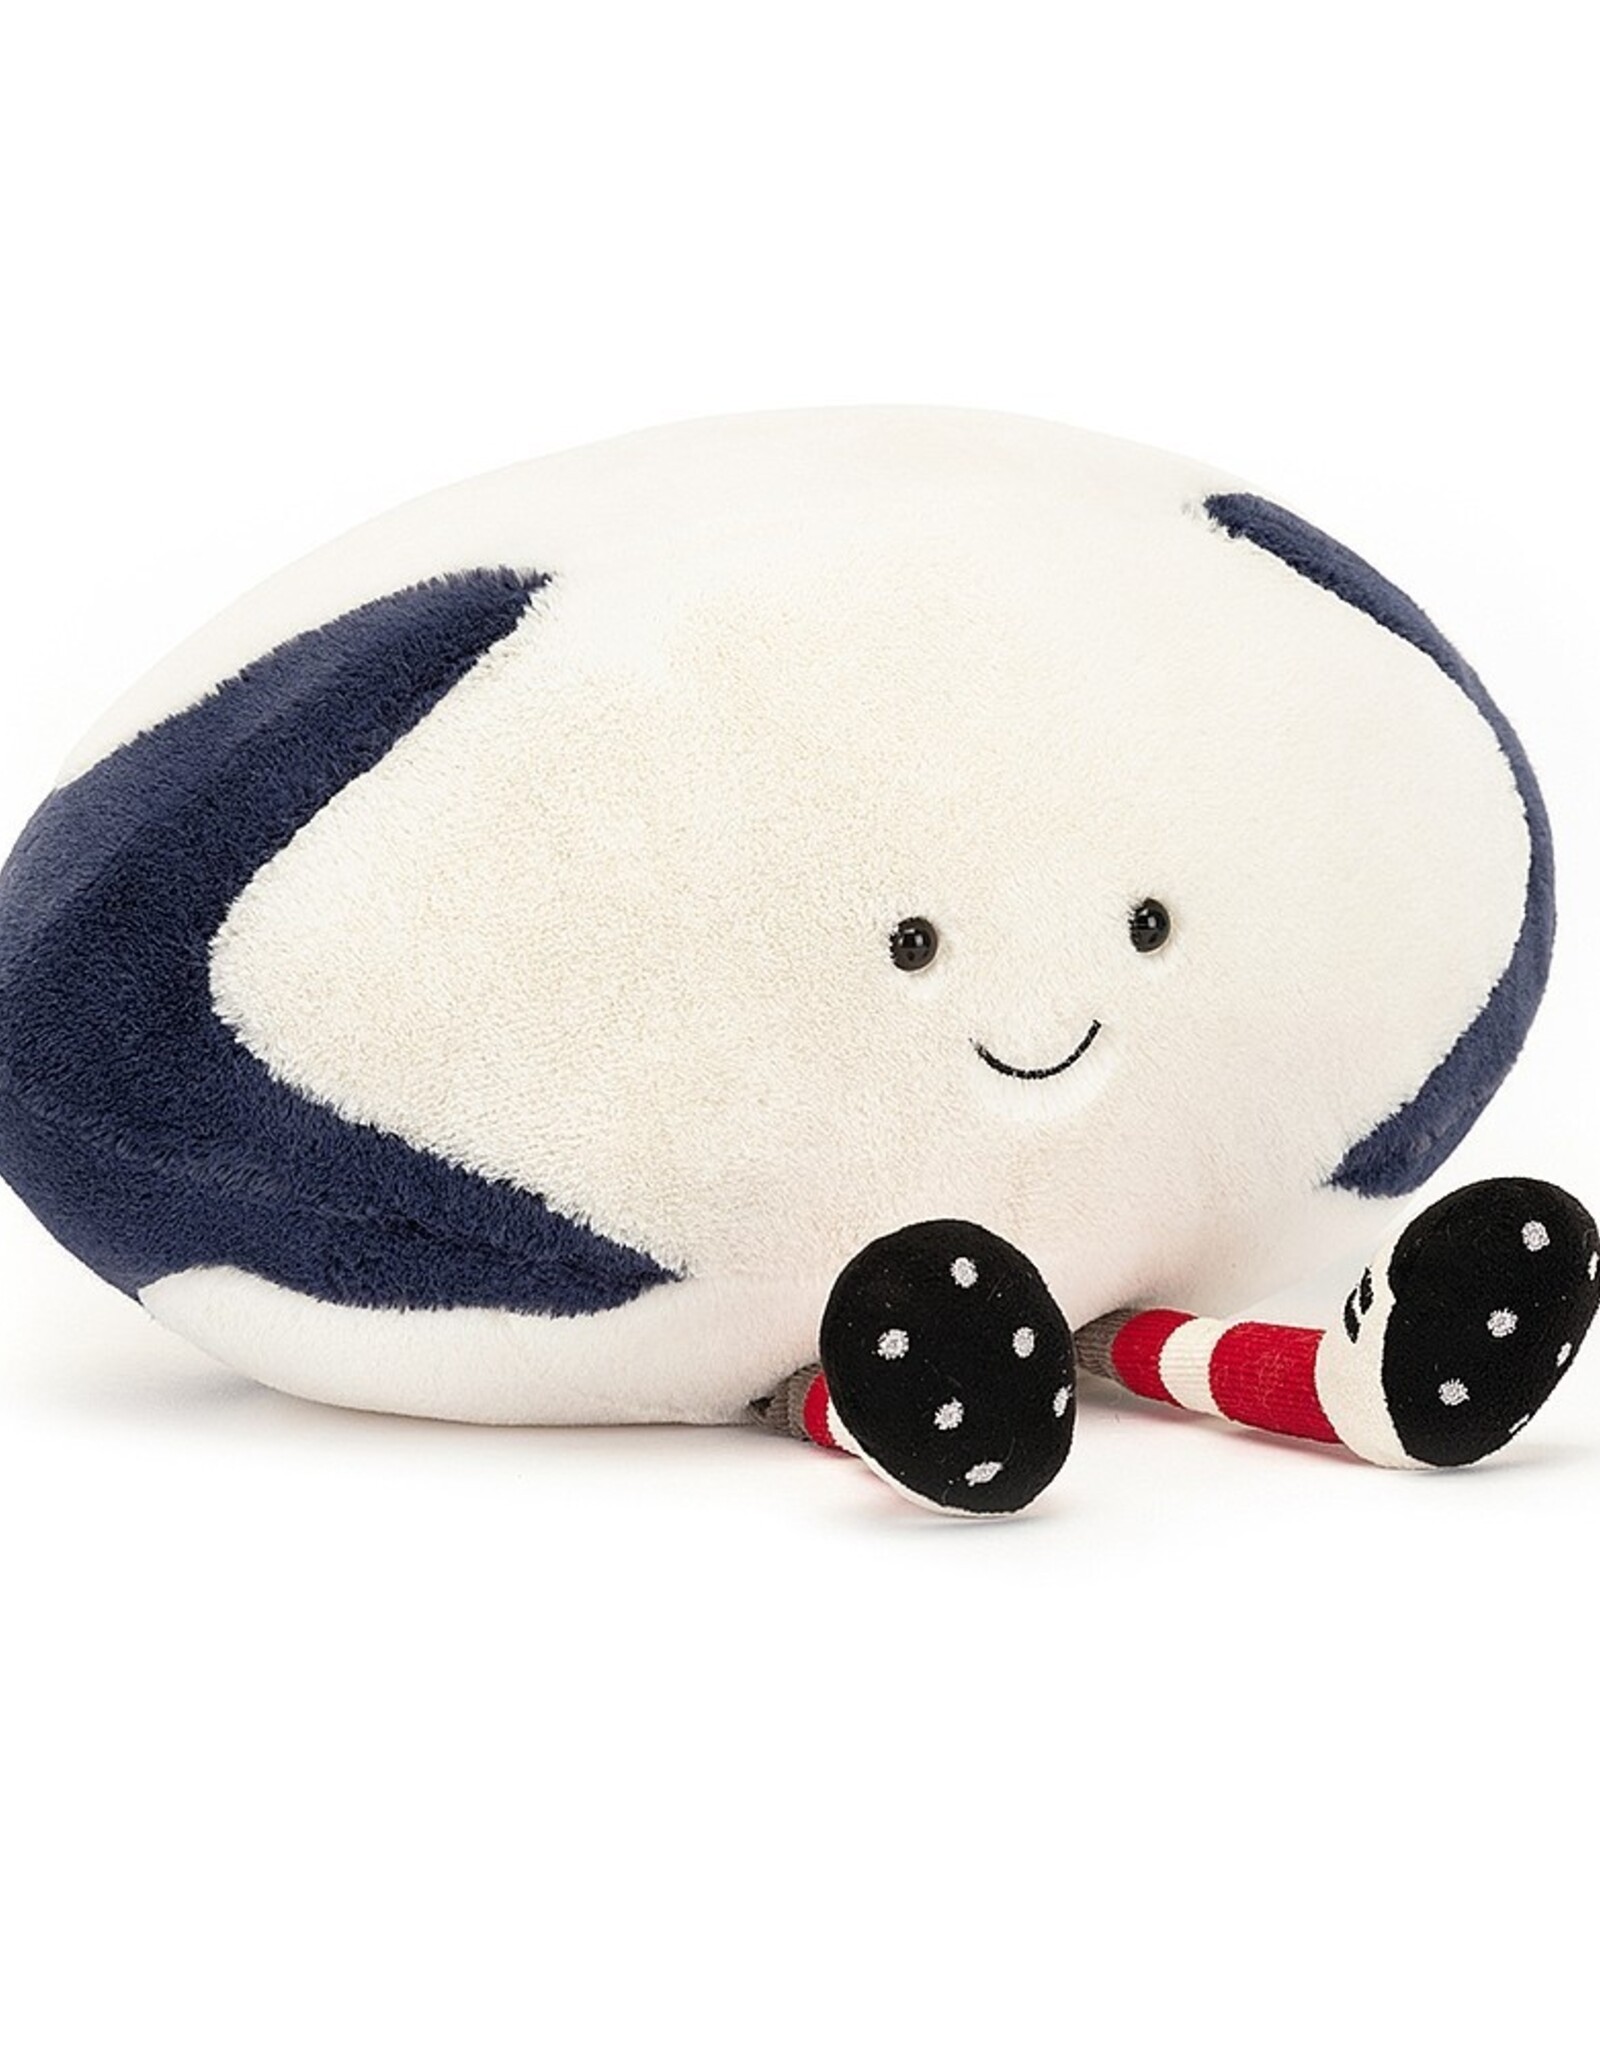 Jellycat Knuffel Amuseable Sports Rugby Ball